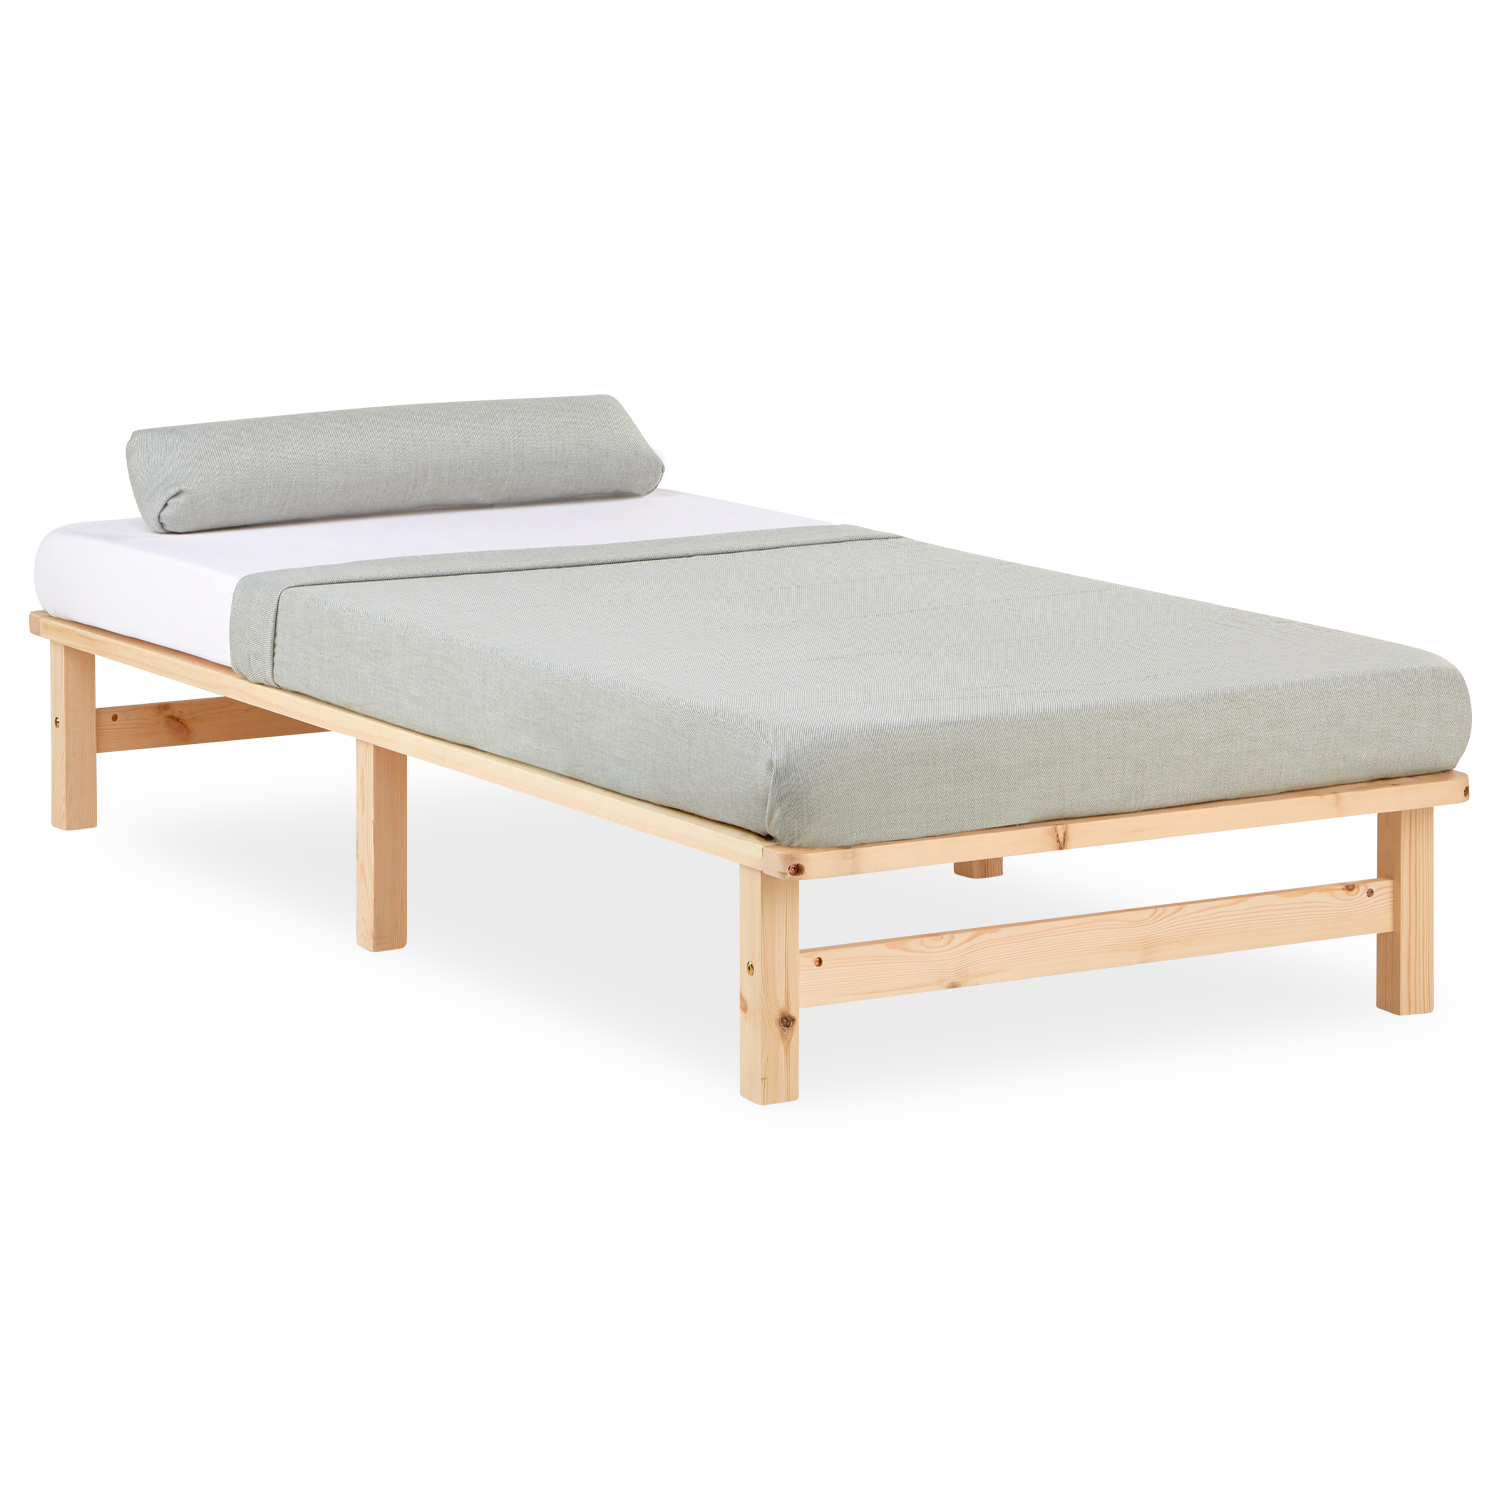 Pallet Bed Natural White 90x200 140x200 cm Wooden Bed Solid Wood Bed Futon Bed Pallet Furniture 